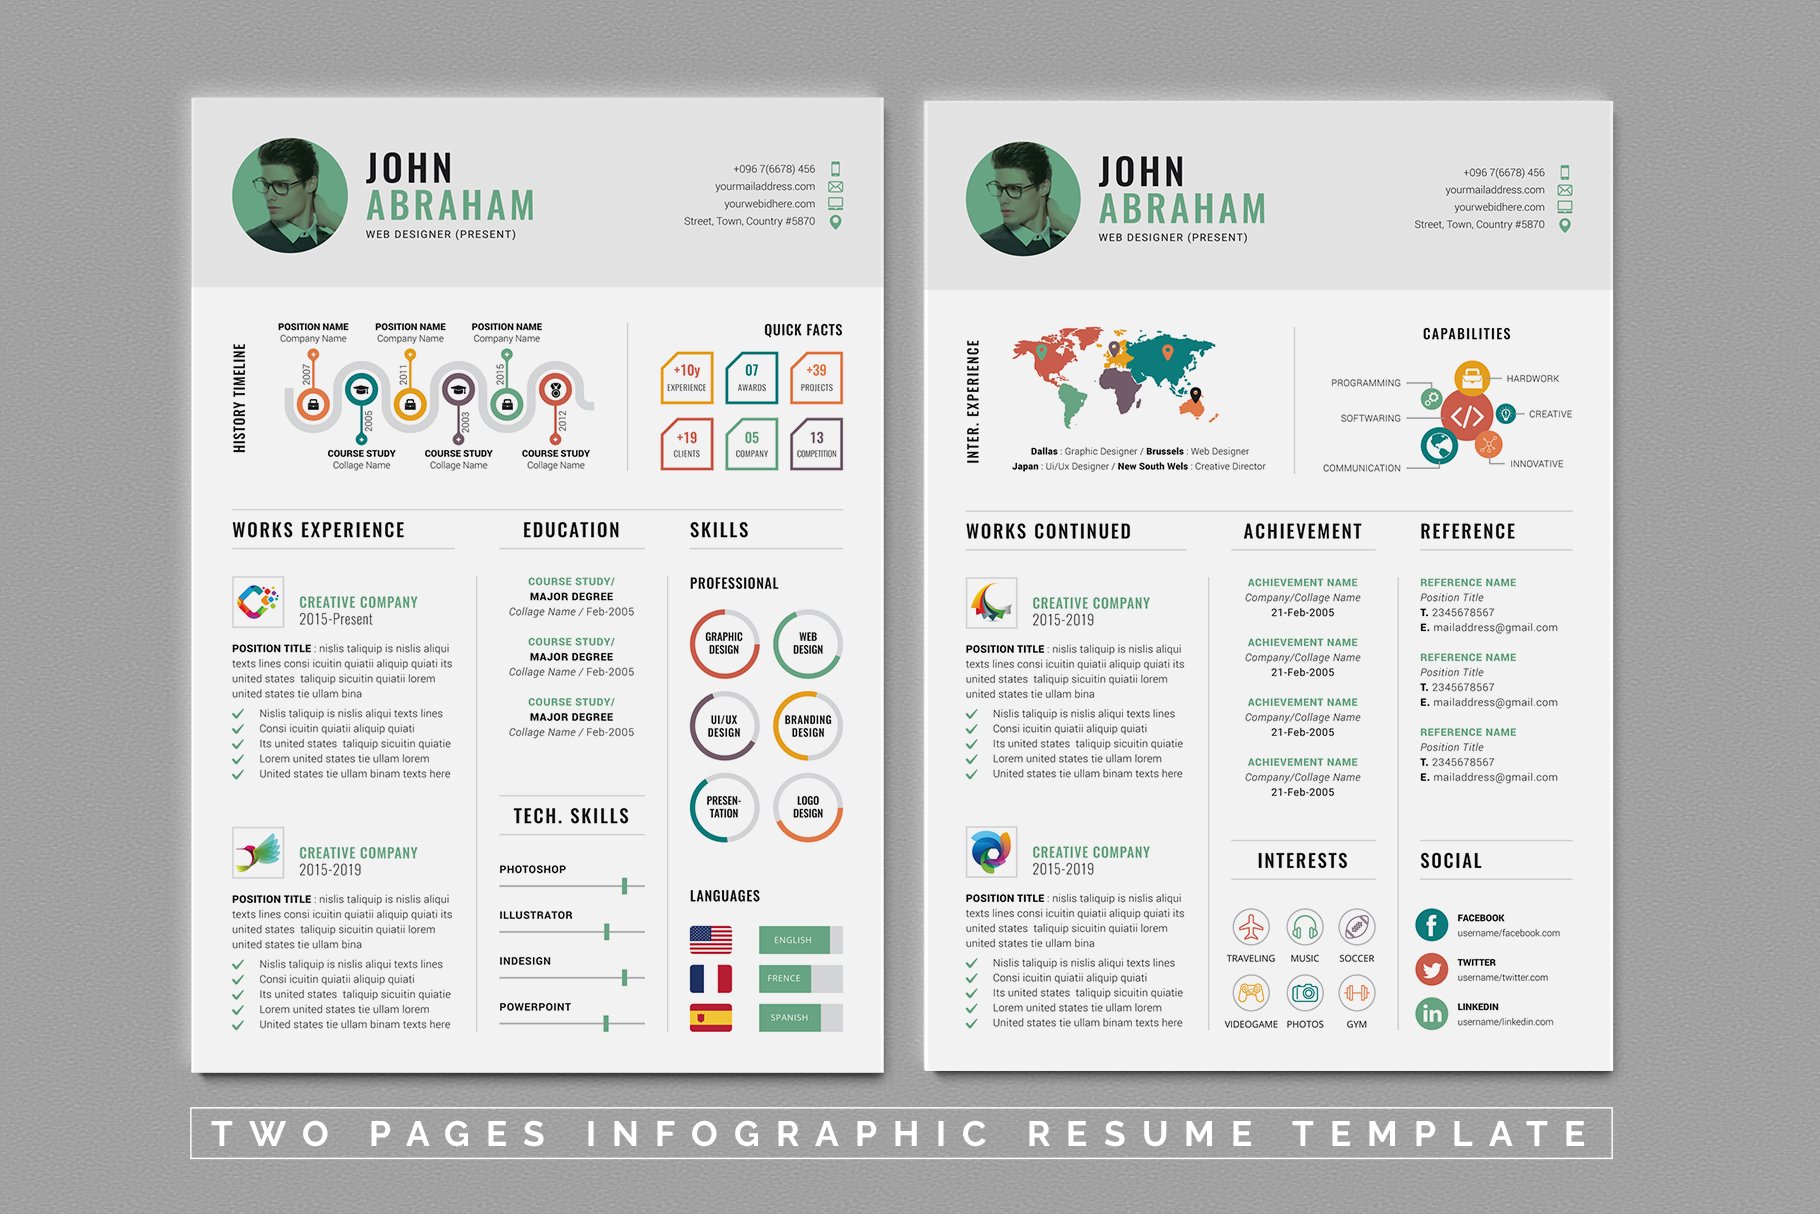 Info-graphic Resume/CV cover image.